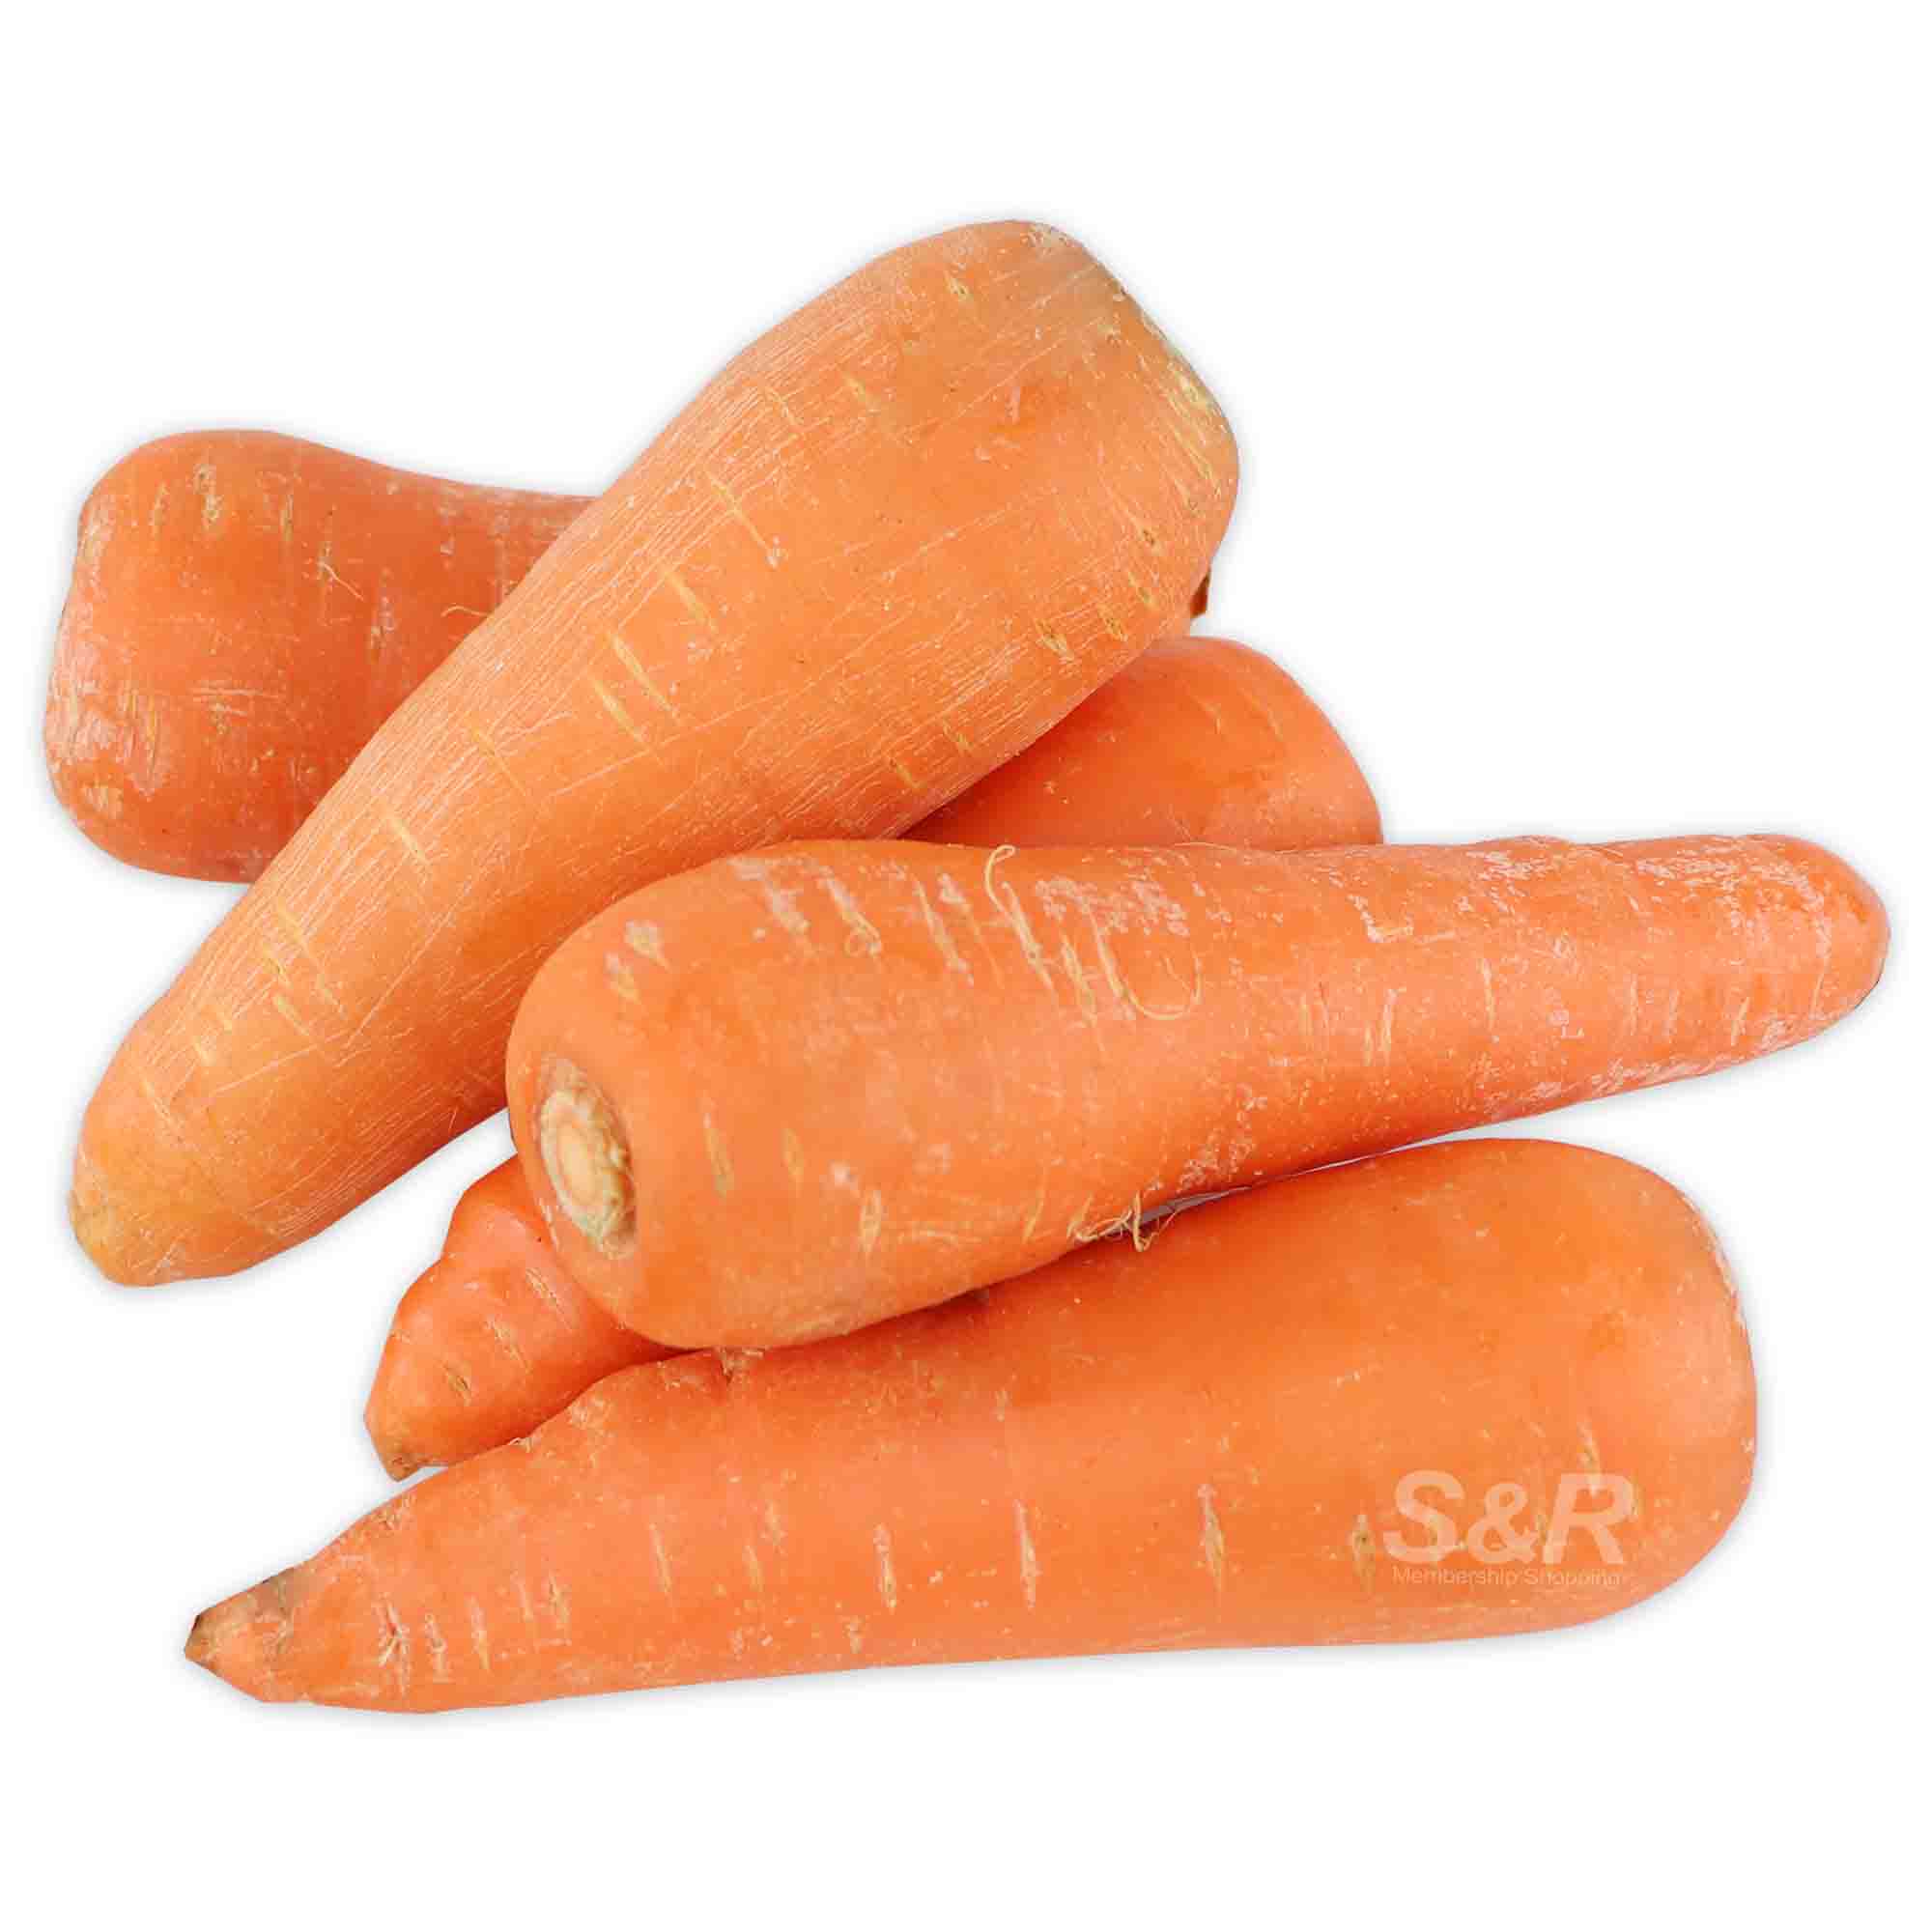 S&R Large Carrots approx. 1.3kg